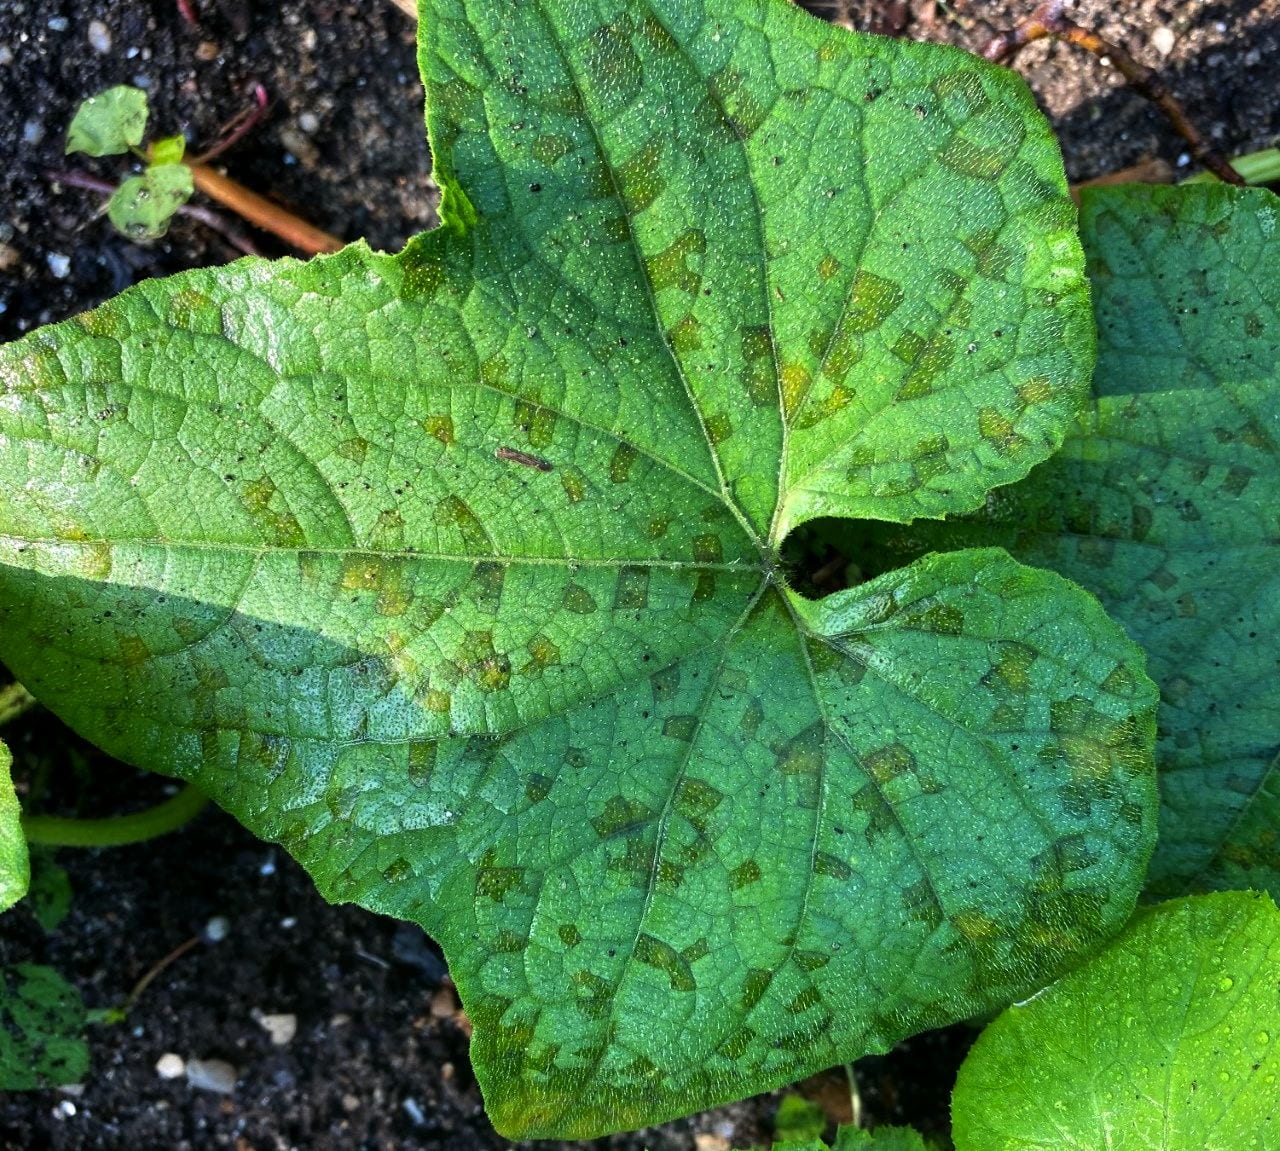 photo of large green leaves with patches of yellow and brown in between leaf veins.